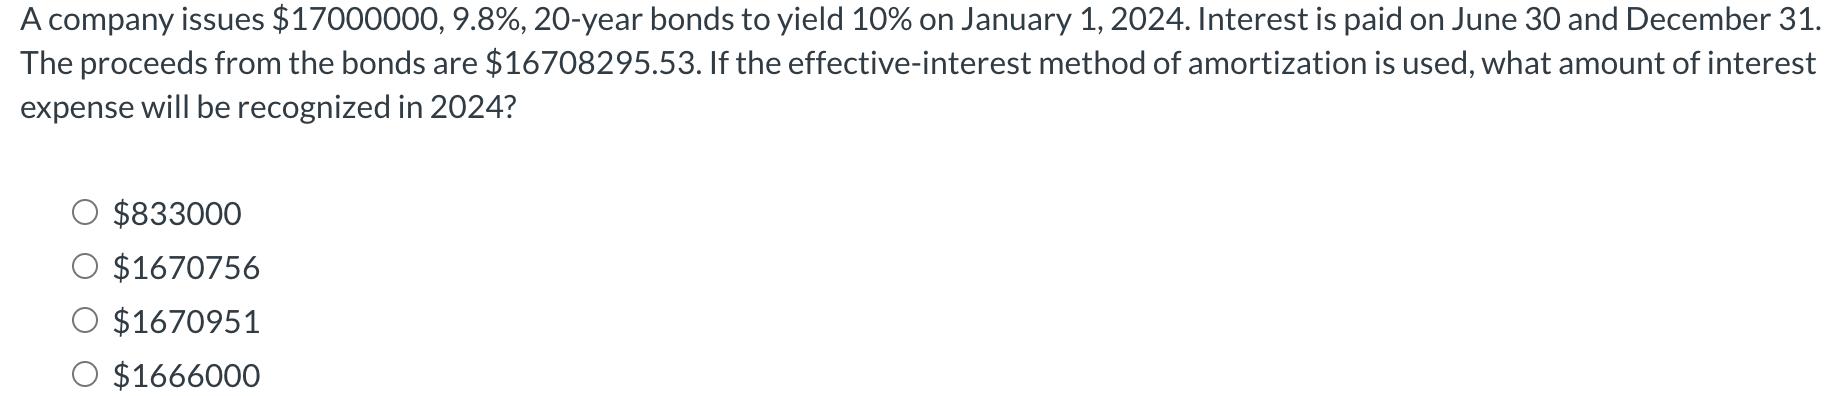 A company issues $17000000, 9.8%, 20-year bonds to yield 10% on January 1, 2024. Interest is paid on June 30